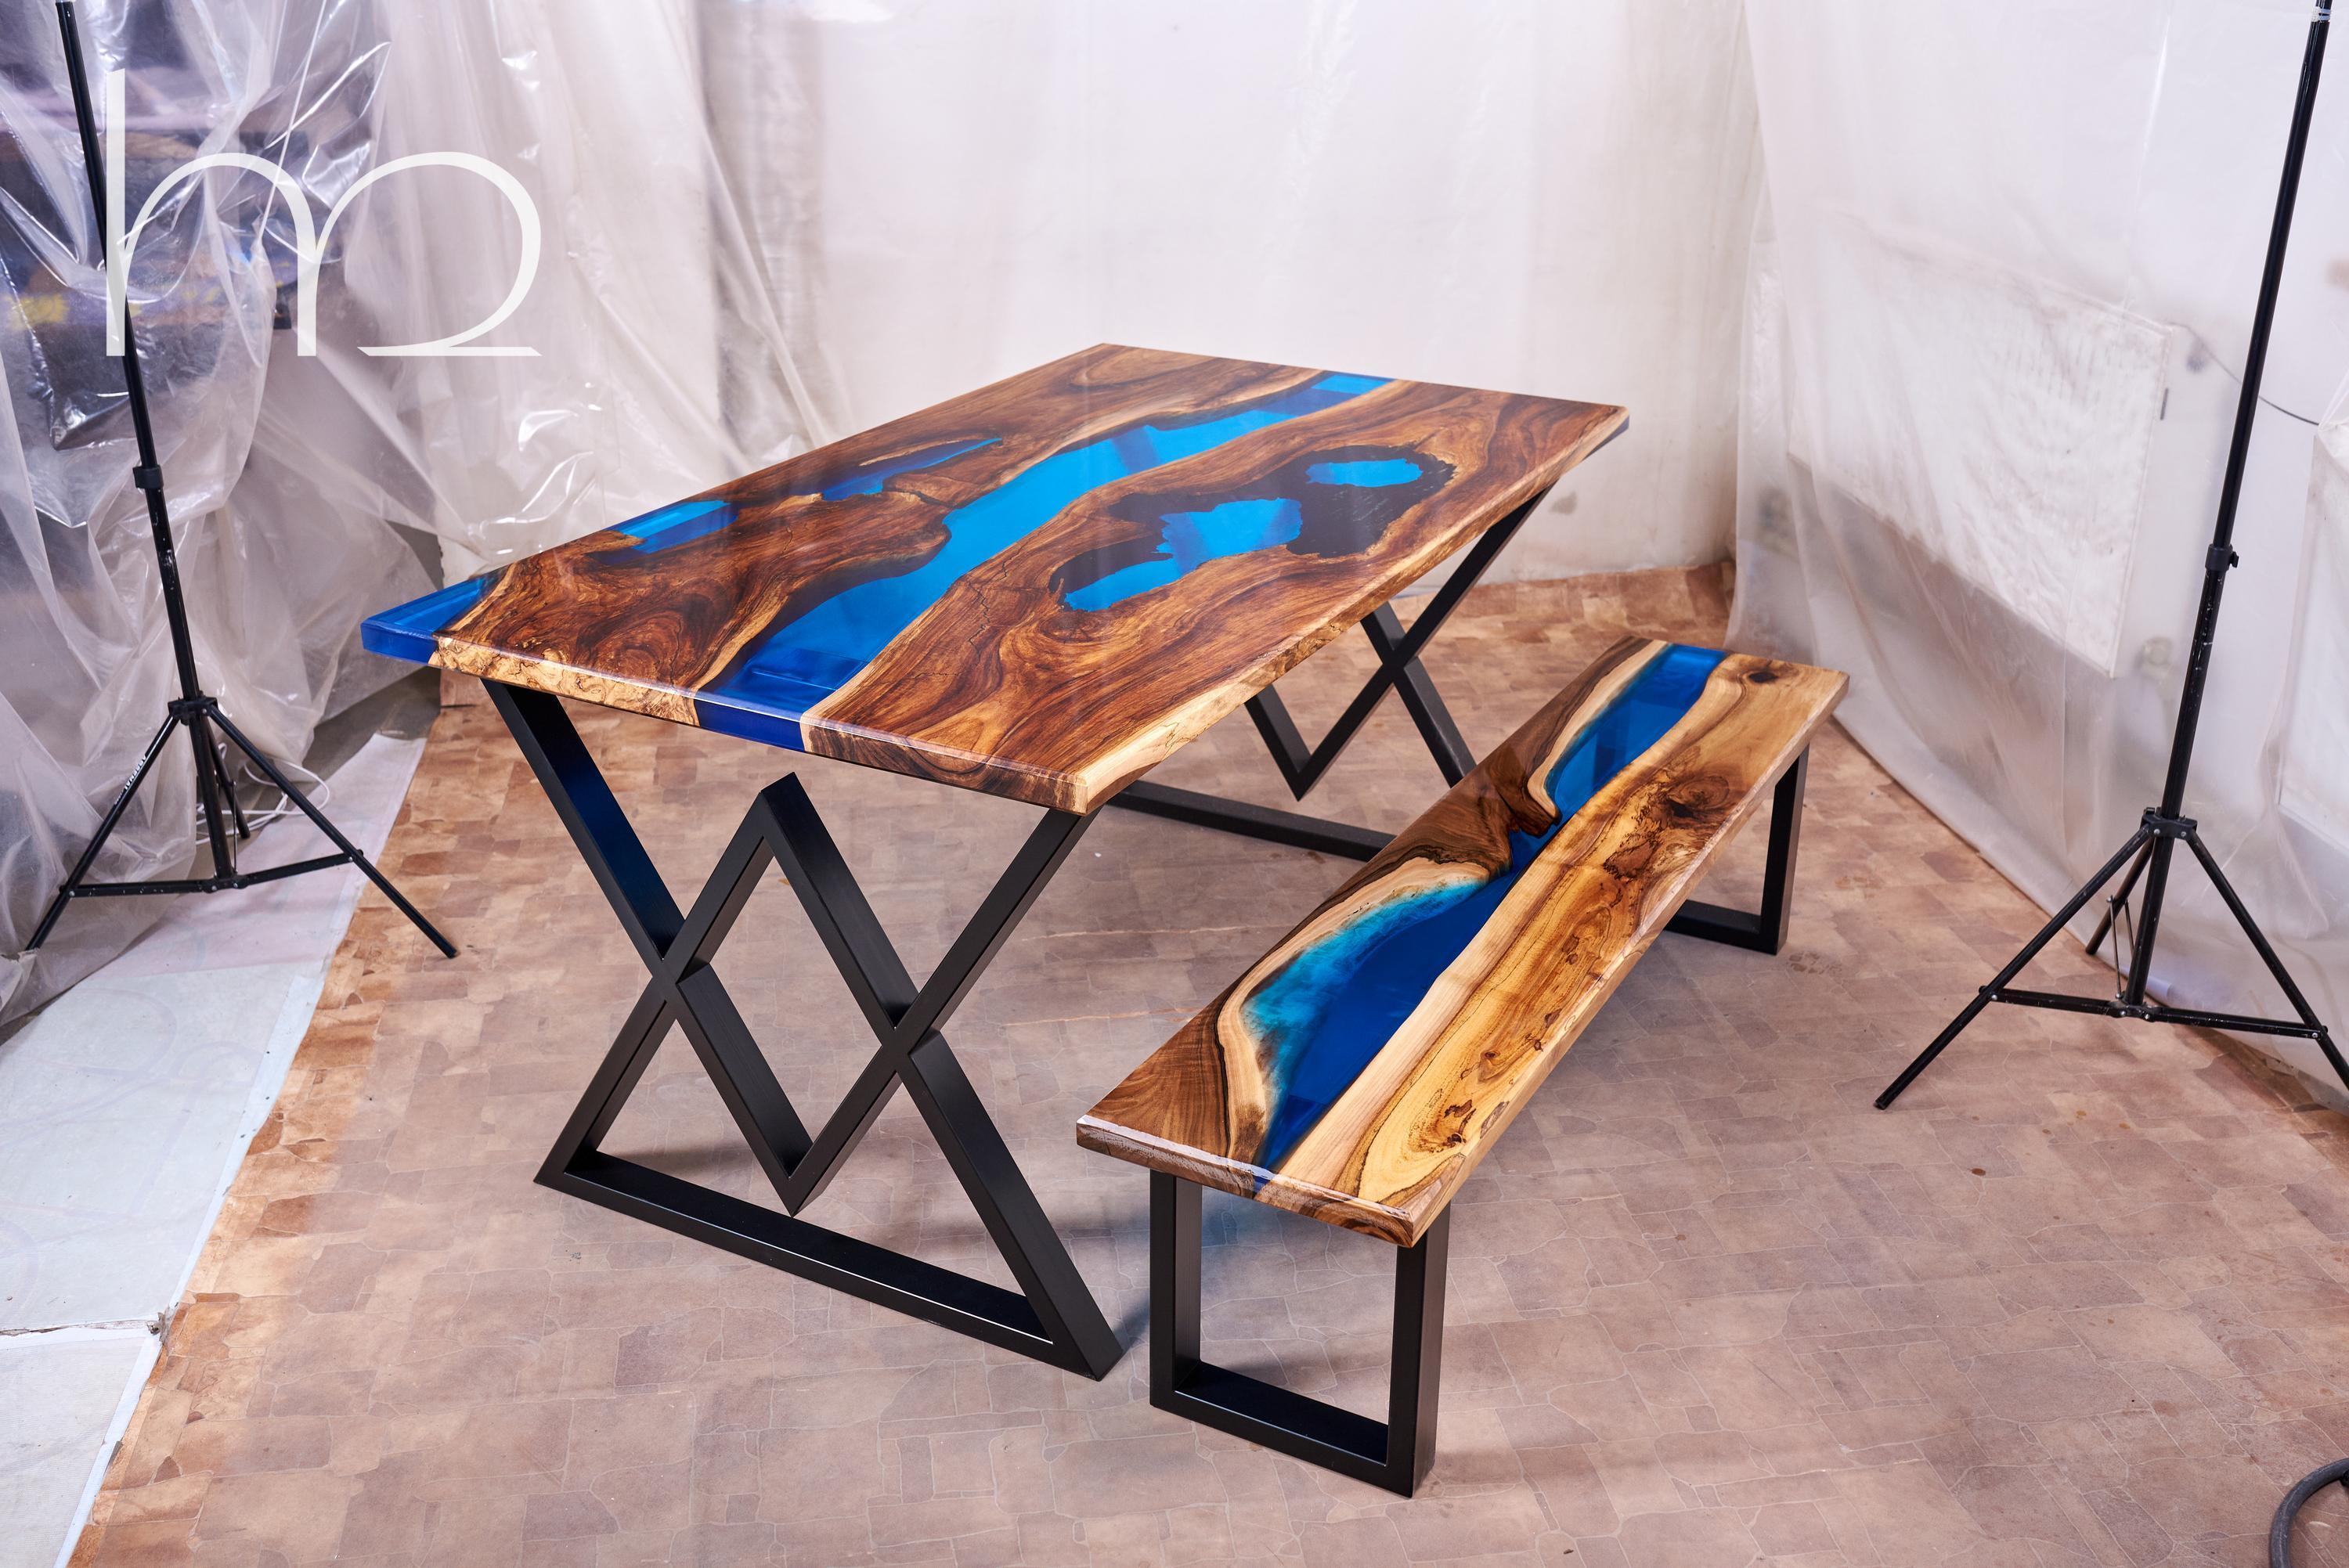 When I made this table, the main challenge was to find really old walnut slabs. So that they would be dark, with a rich dark vein, a little rotten and with lots of holes and cracks. The resin color had to be a clear blue and it's cool to find wood